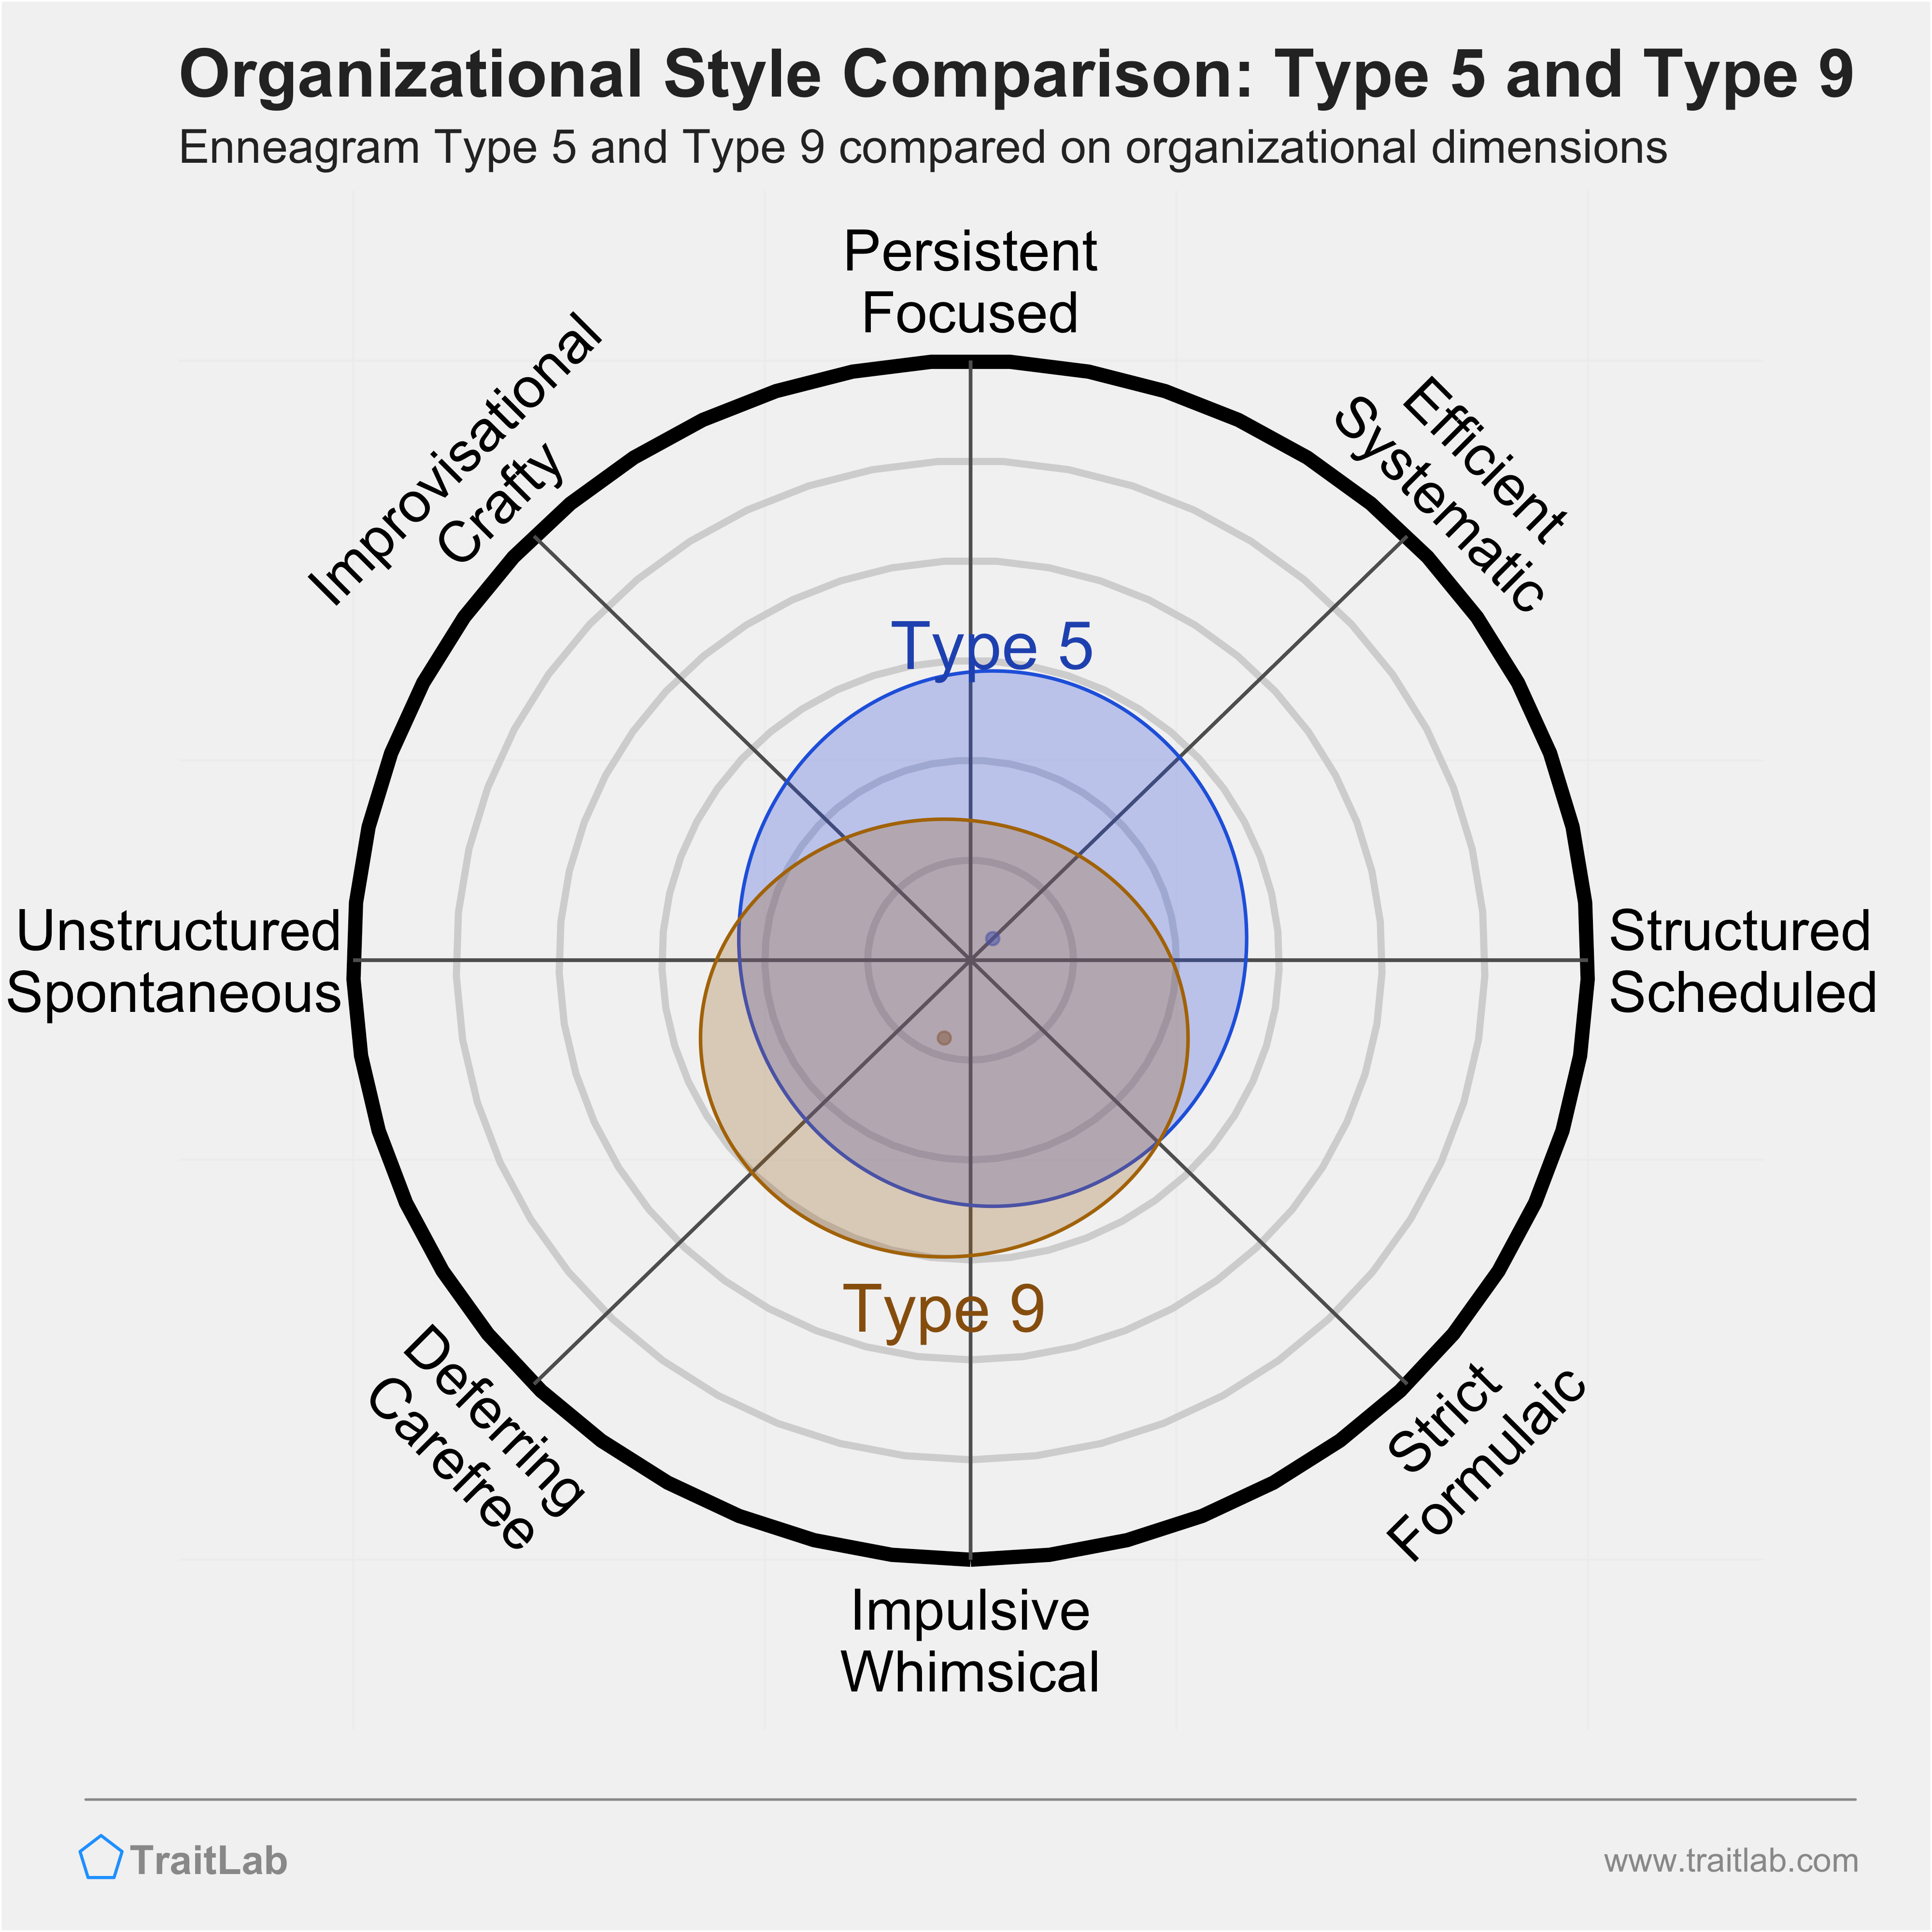 Type 5 and Type 9 comparison across organizational dimensions